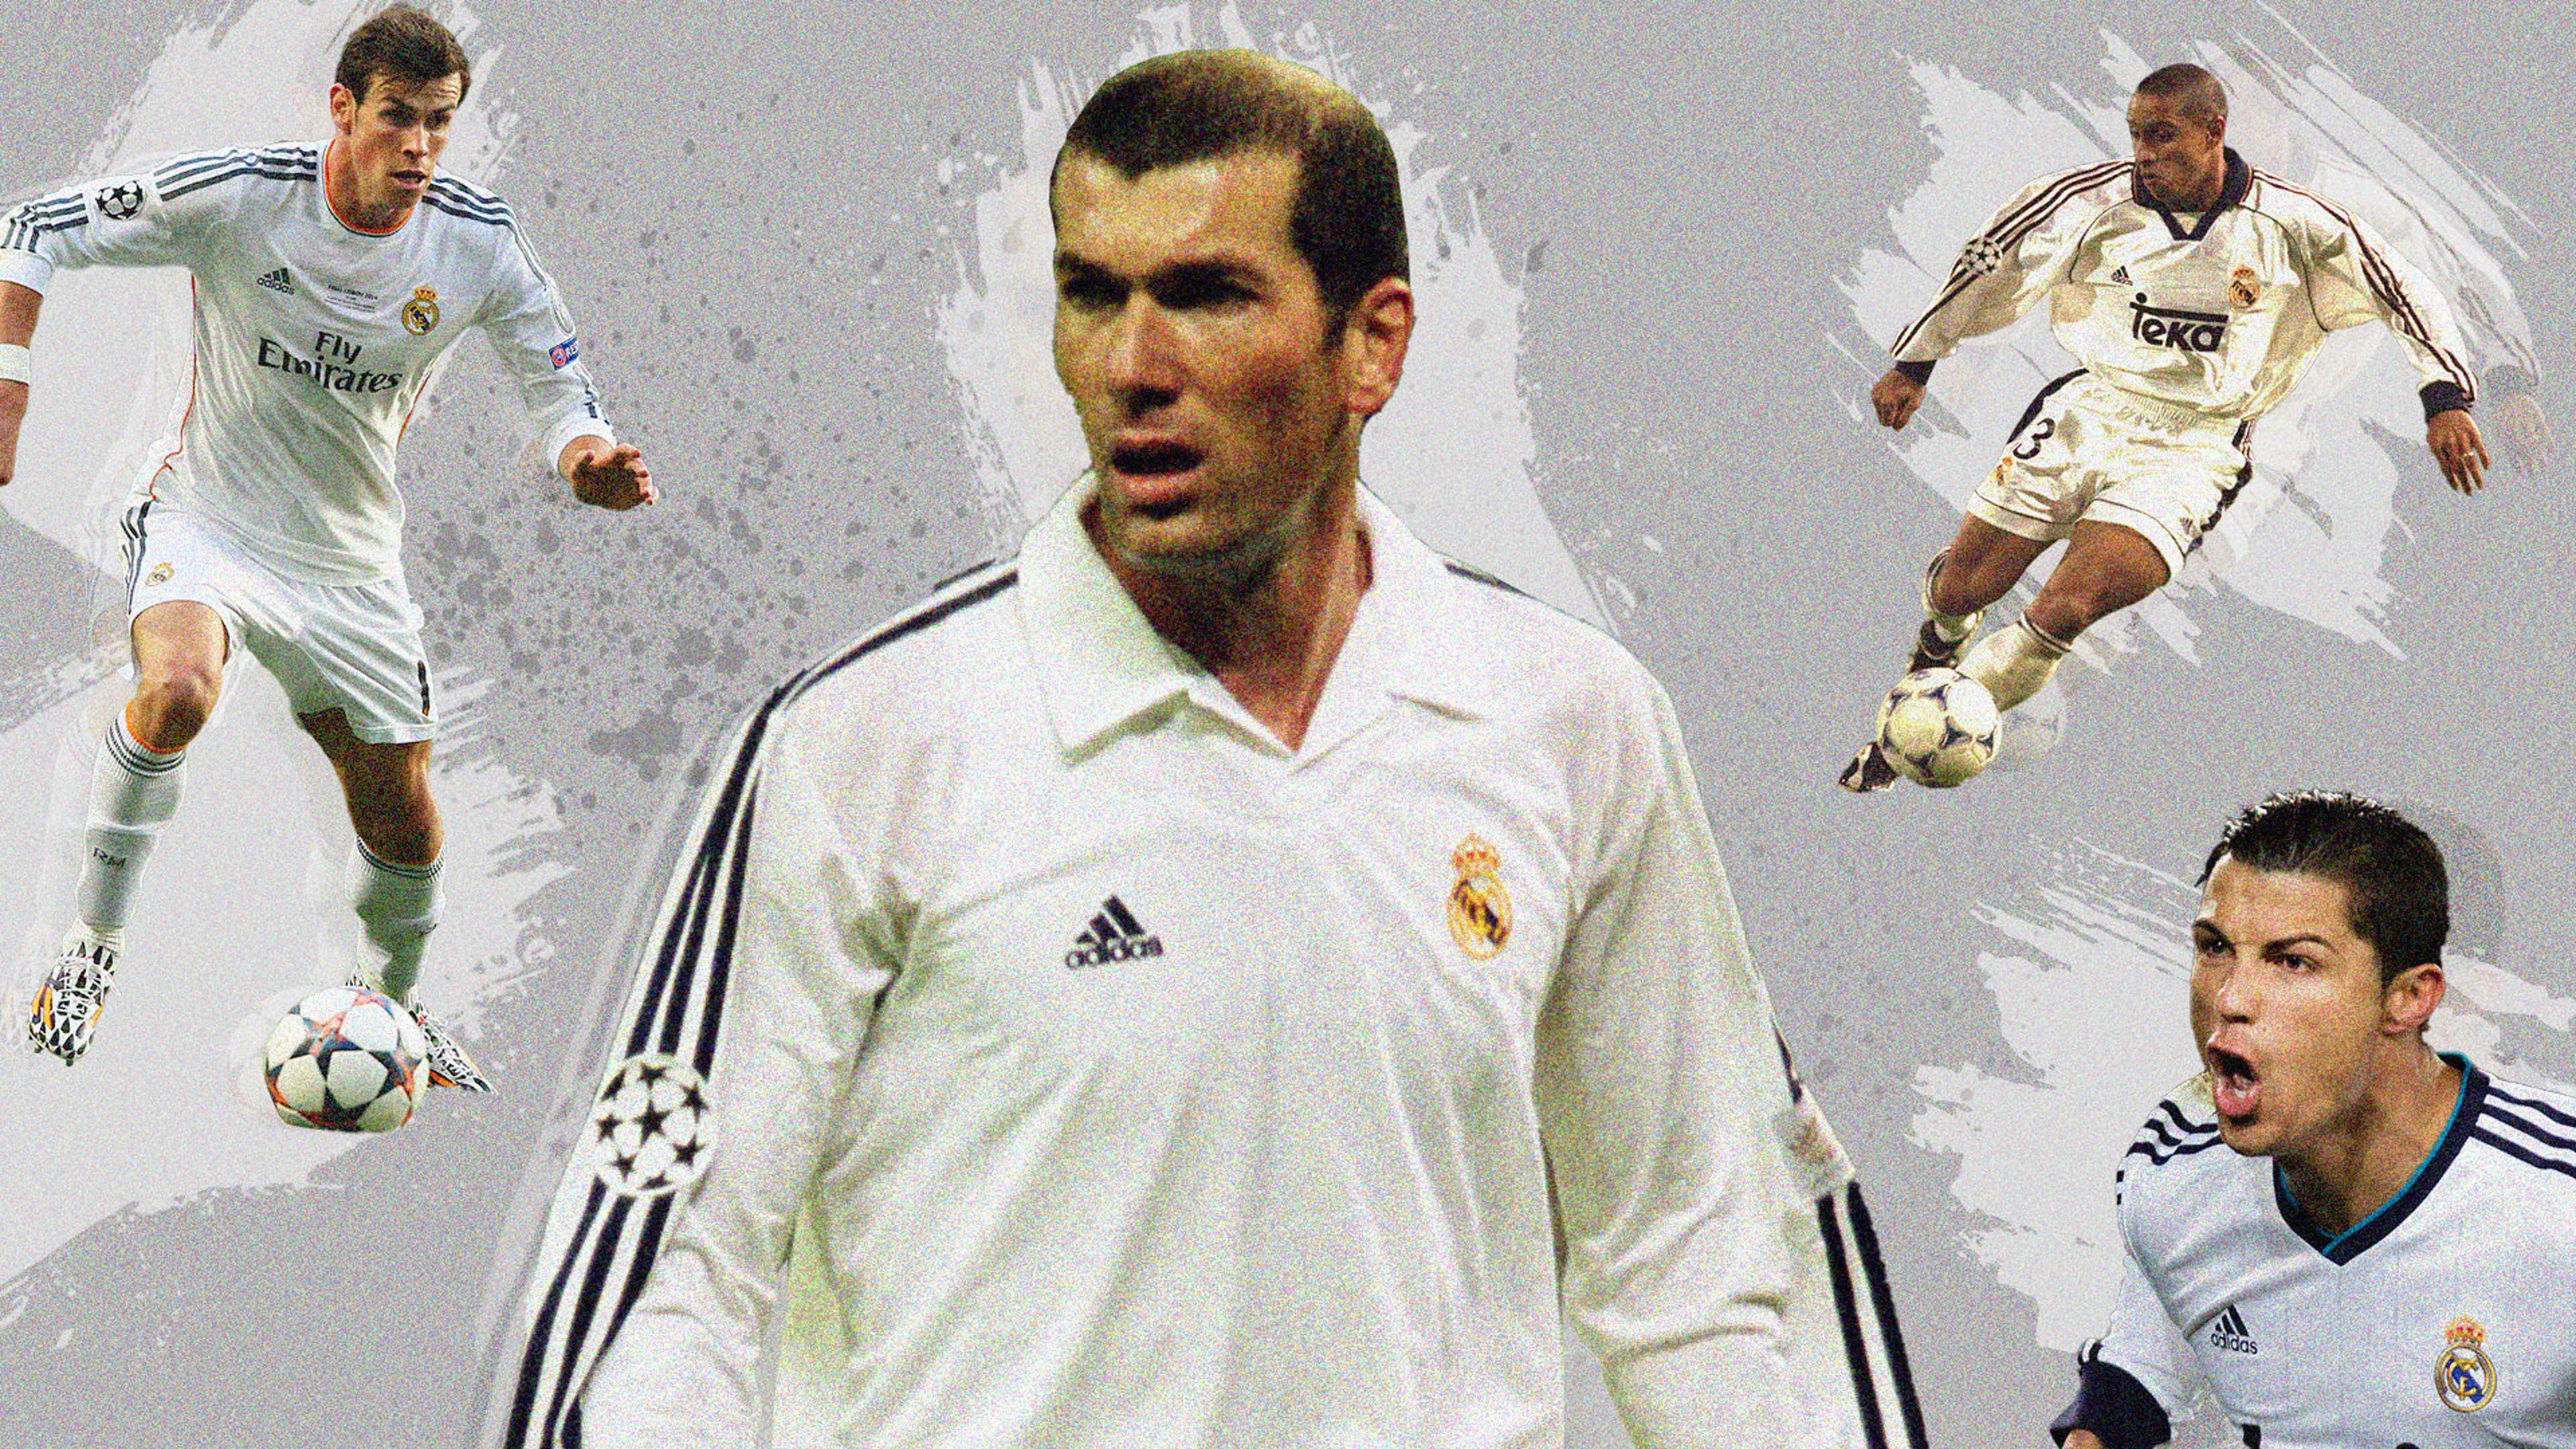 Real Madrid's top 10 away and third kits of all time - ranked